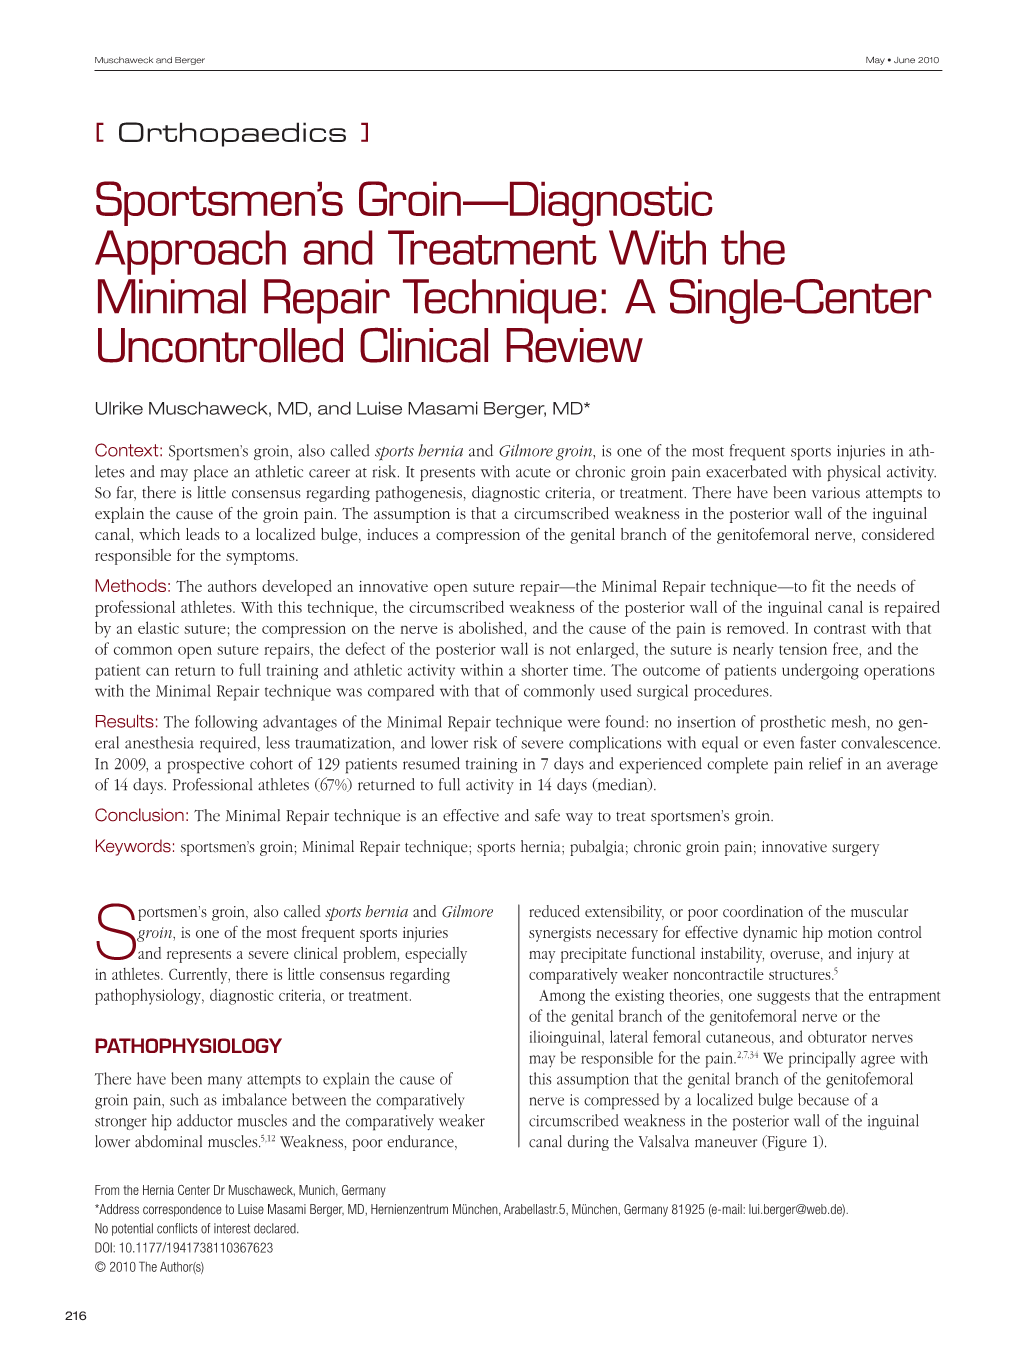 Sportsmen's Groin—Diagnostic Approach and Treatment with The